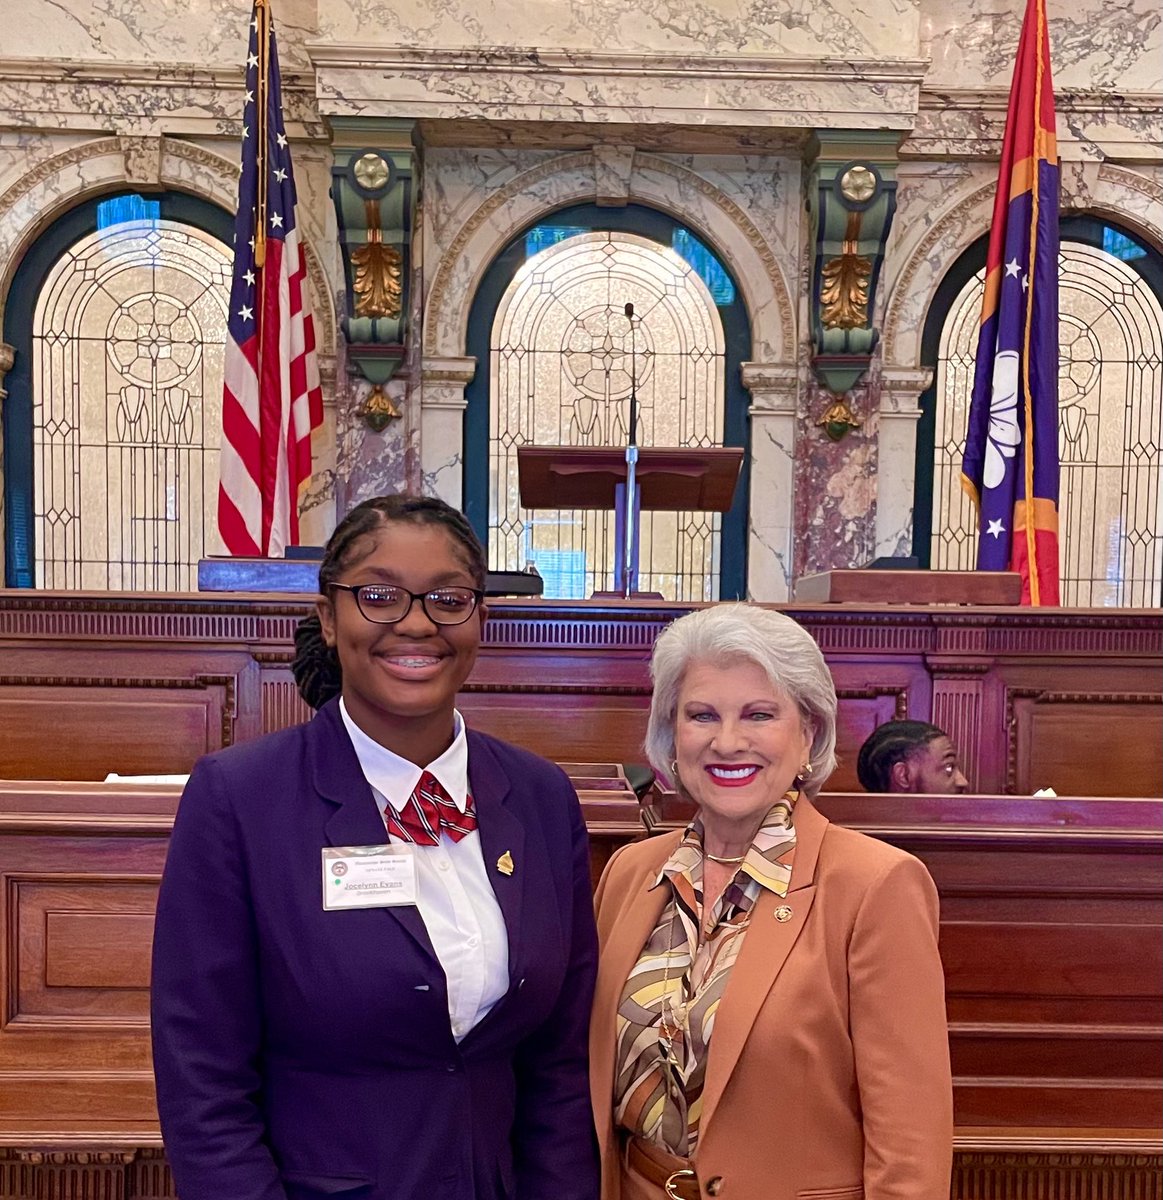 Jocelynn Evans, from Brookhaven, is Paging for the Senate this week. She is doing a fantastic job!! She and my great nephew attend the same high school and are in the same class in Brookhaven.